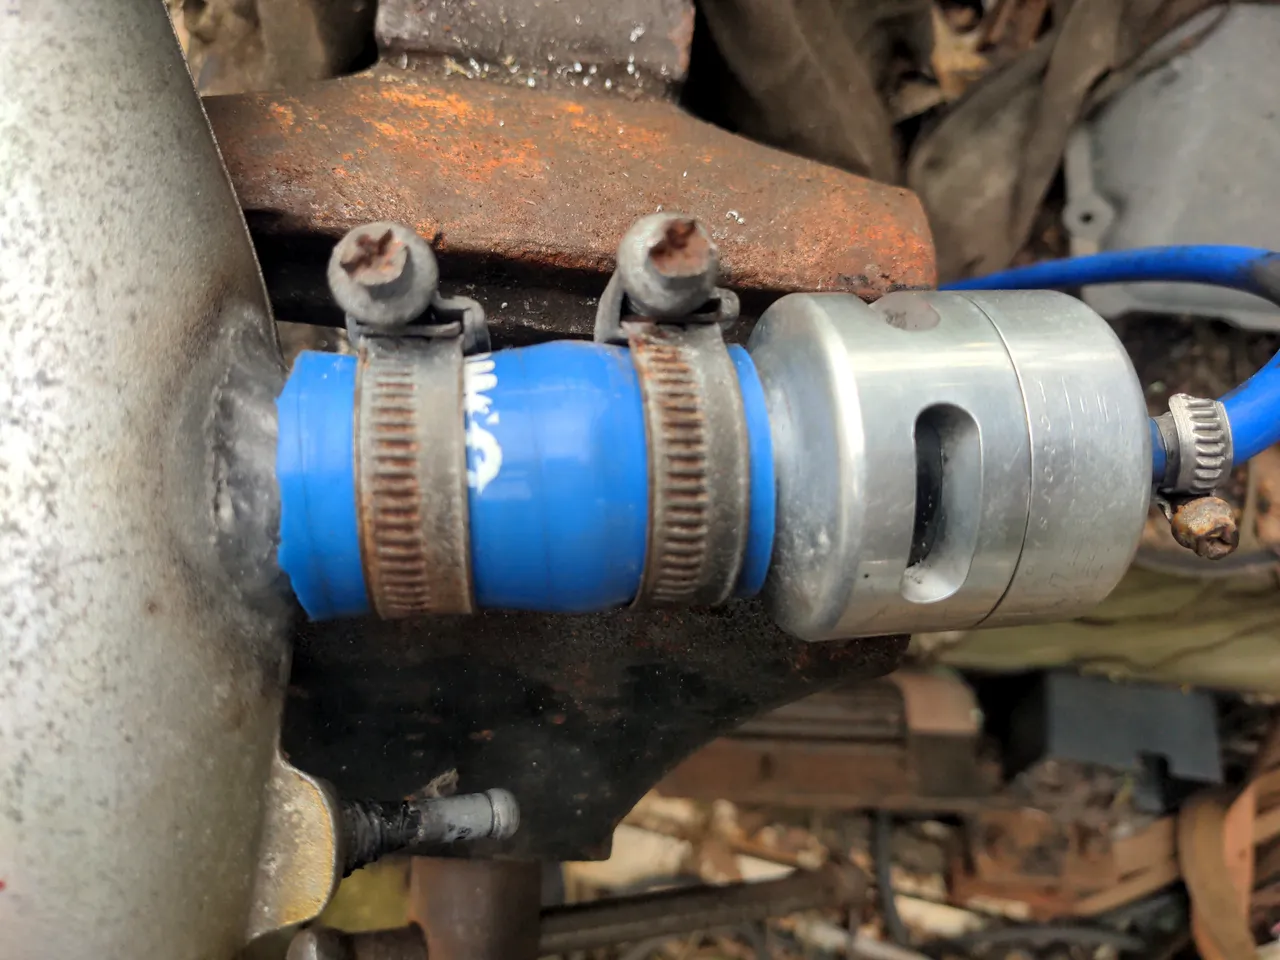 A silver Bailey DV26 attached to my pipe via a blue Samco coupling hose.